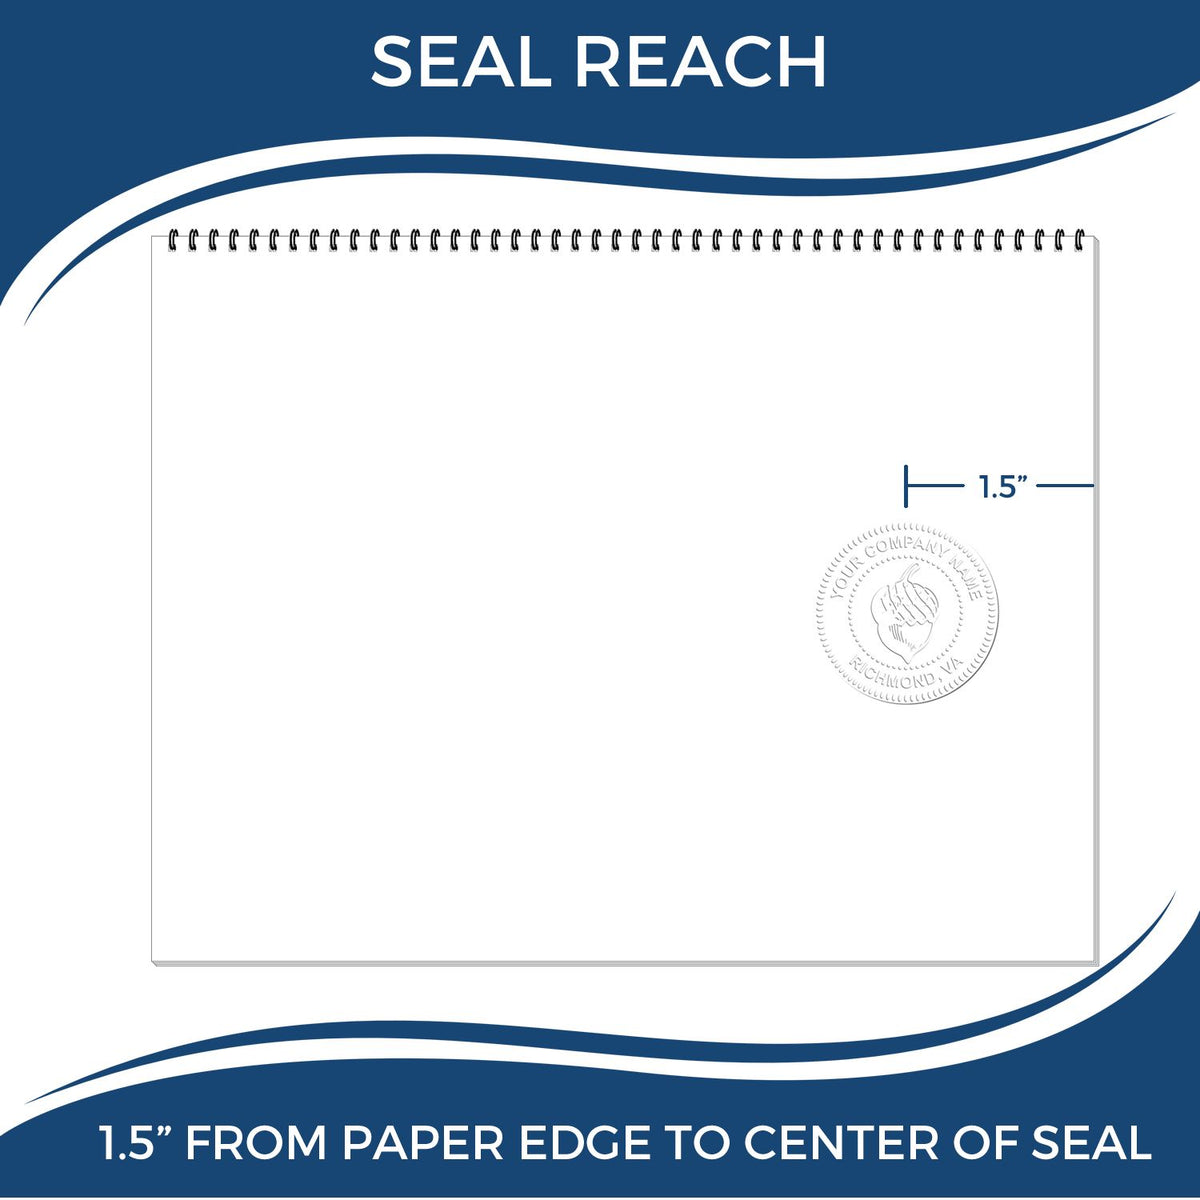 An infographic showing the seal reach which is represented by a ruler and a miniature seal image of the Gift Hawaii Engineer Seal